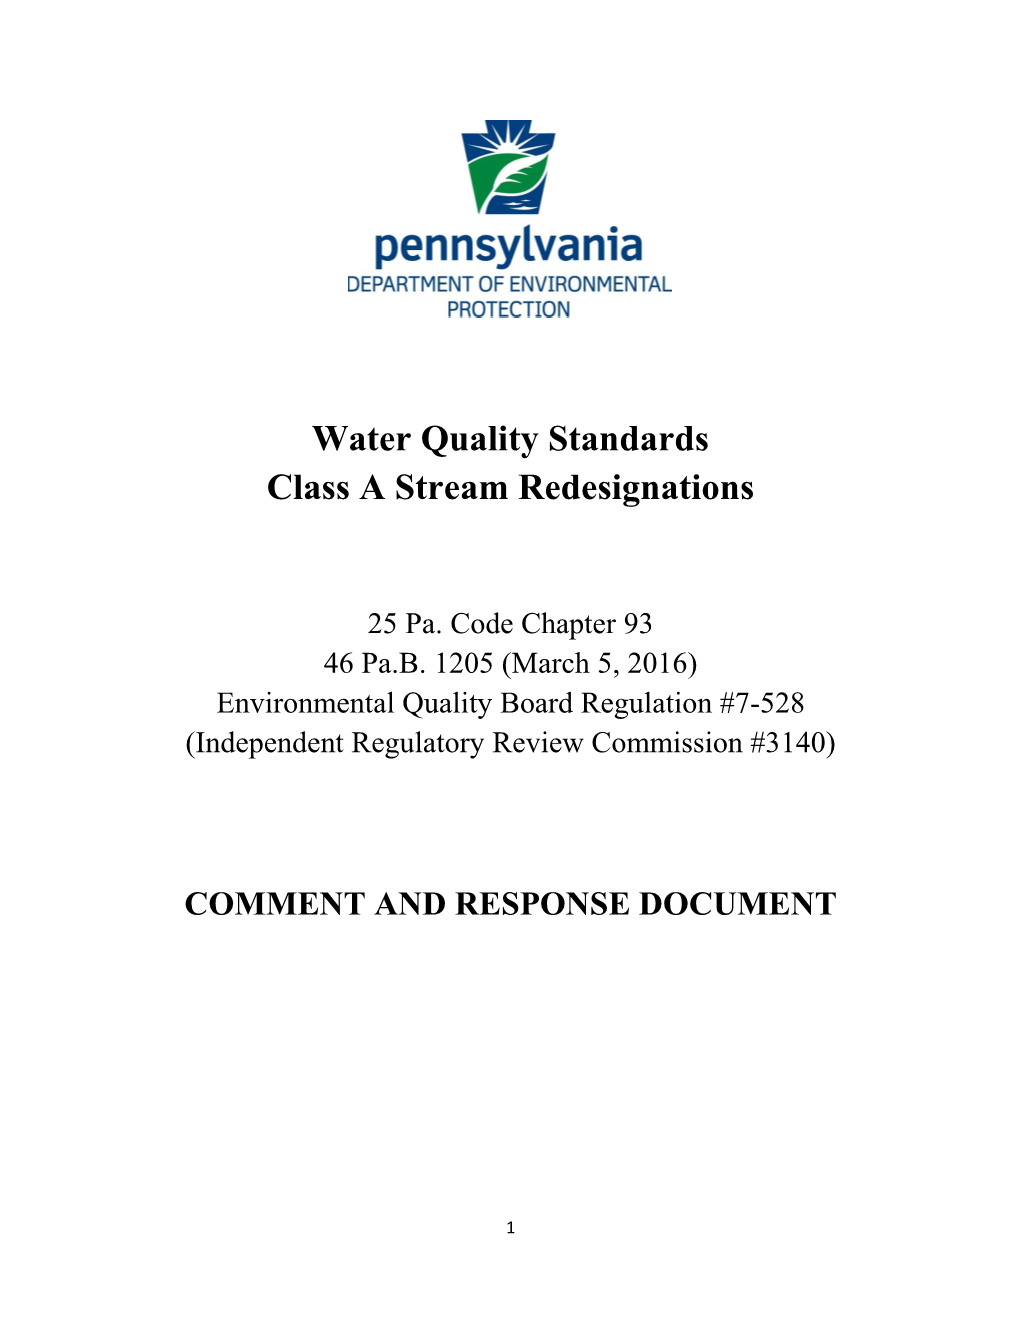 Water Quality Standards Class a Stream Redesignations